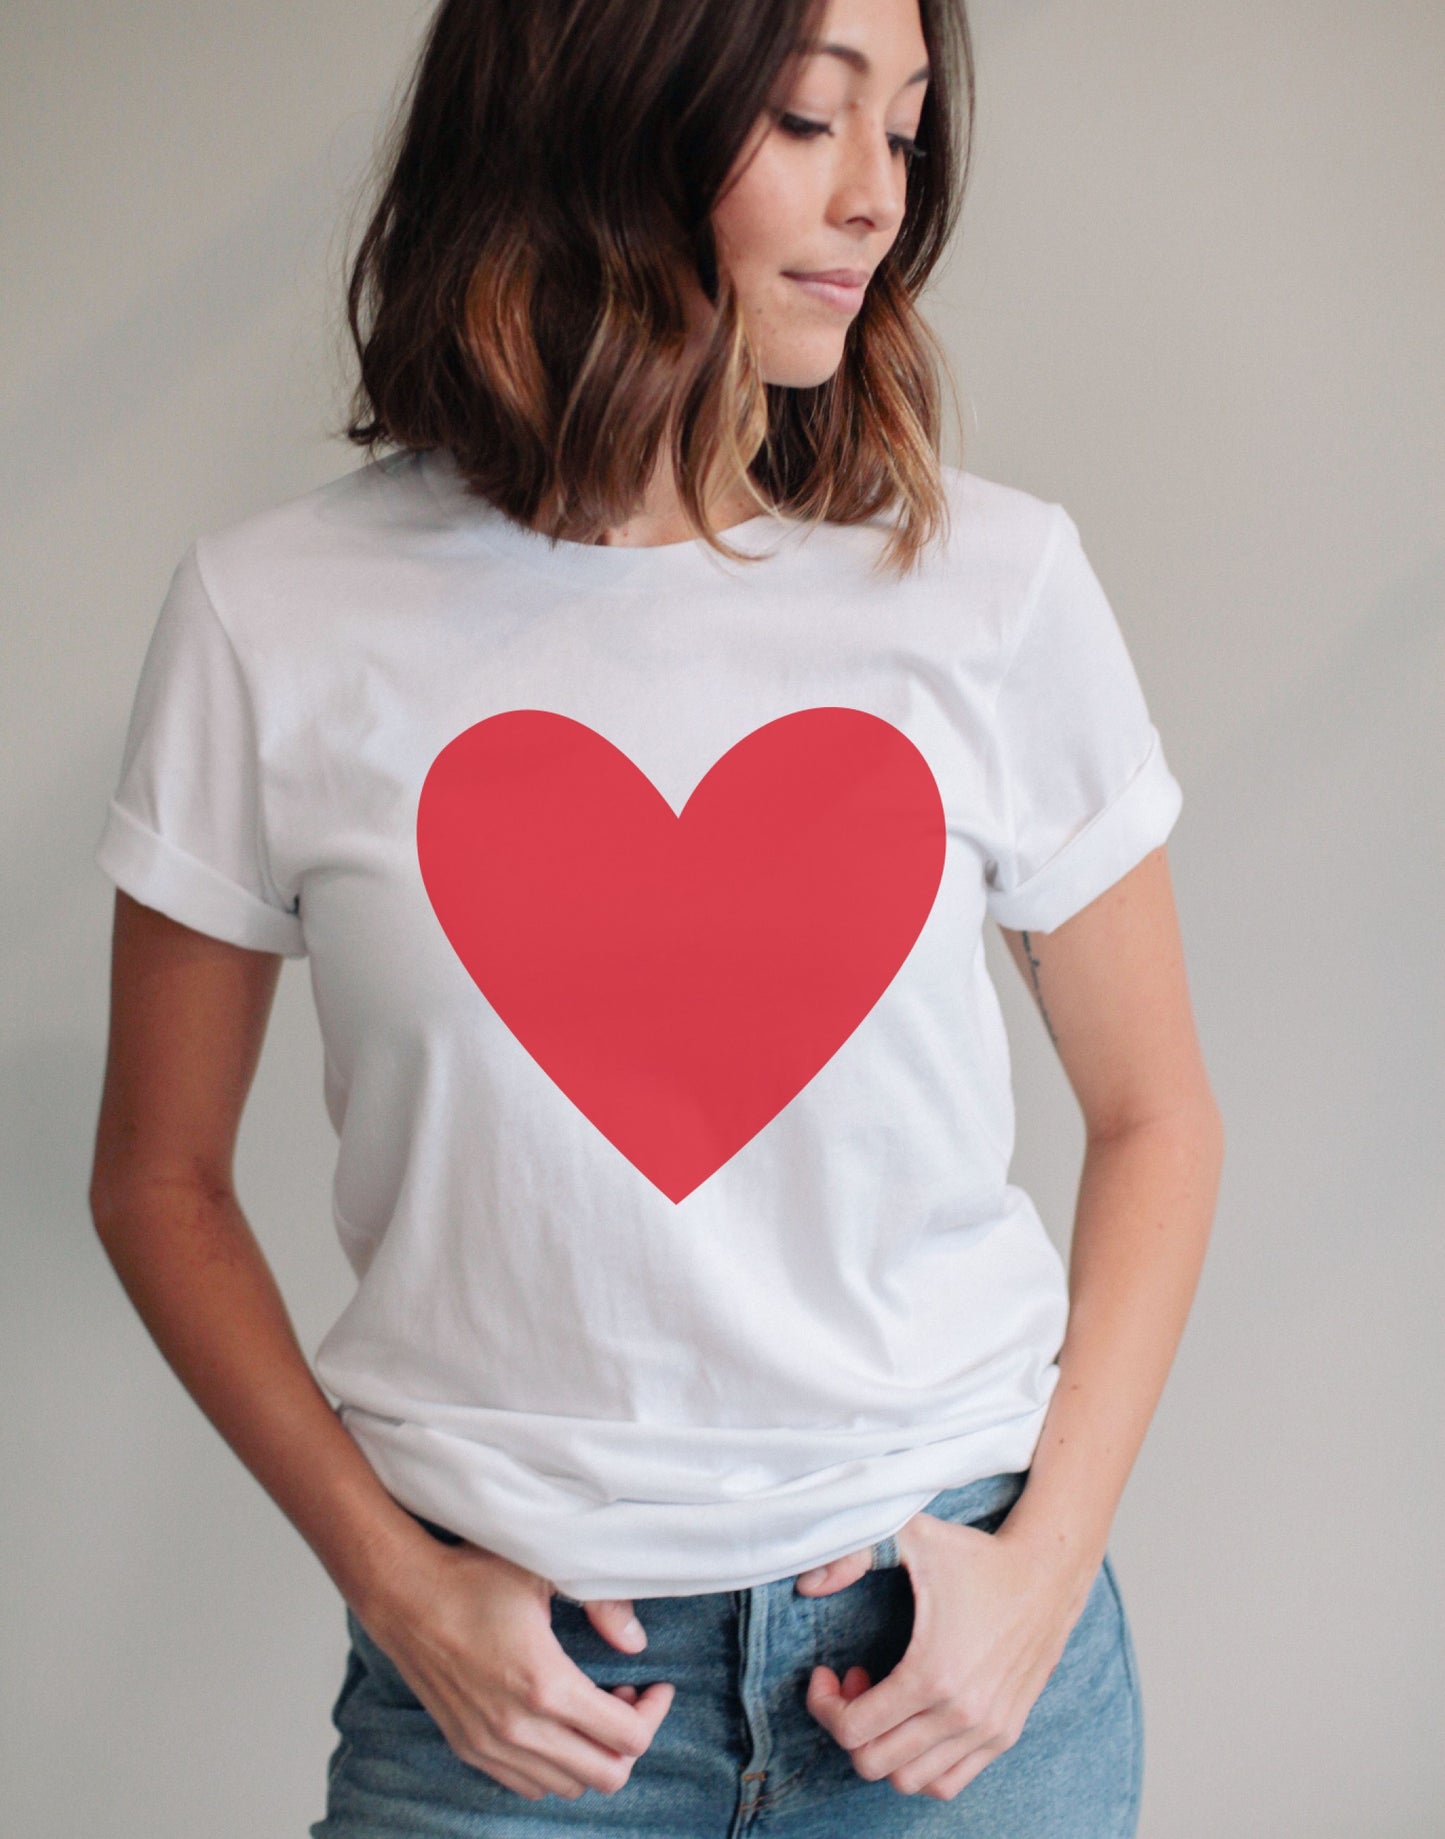 Sale AS IS- Have a Heart T-Shirt, LARGE